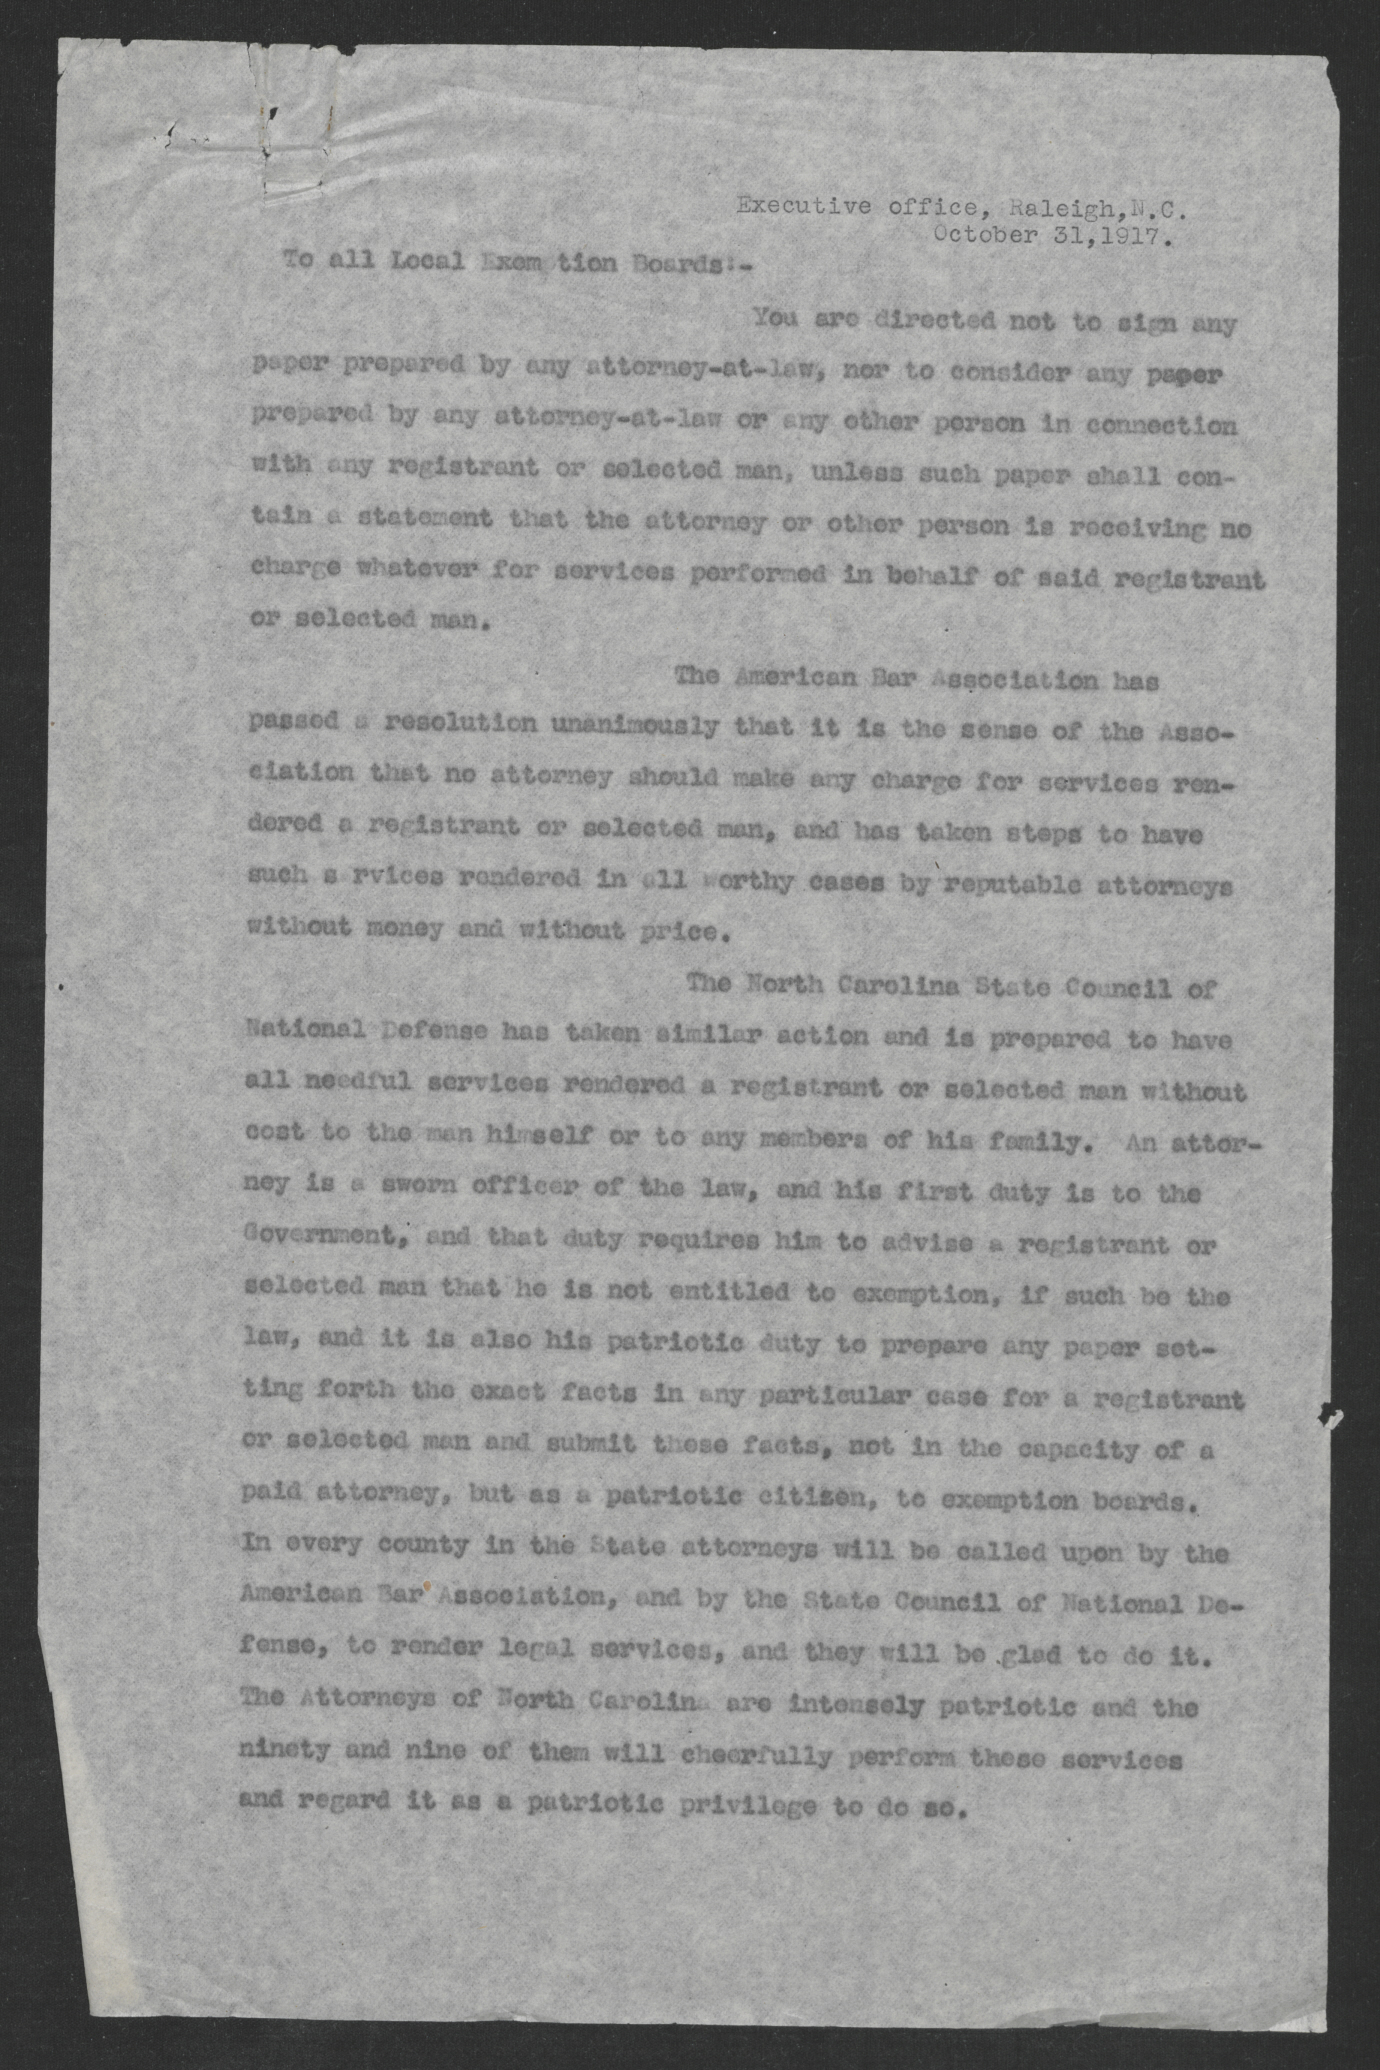 Letter from Thomas W. Bickett to All Local Exemption Boards, October 31, 1917, page 1